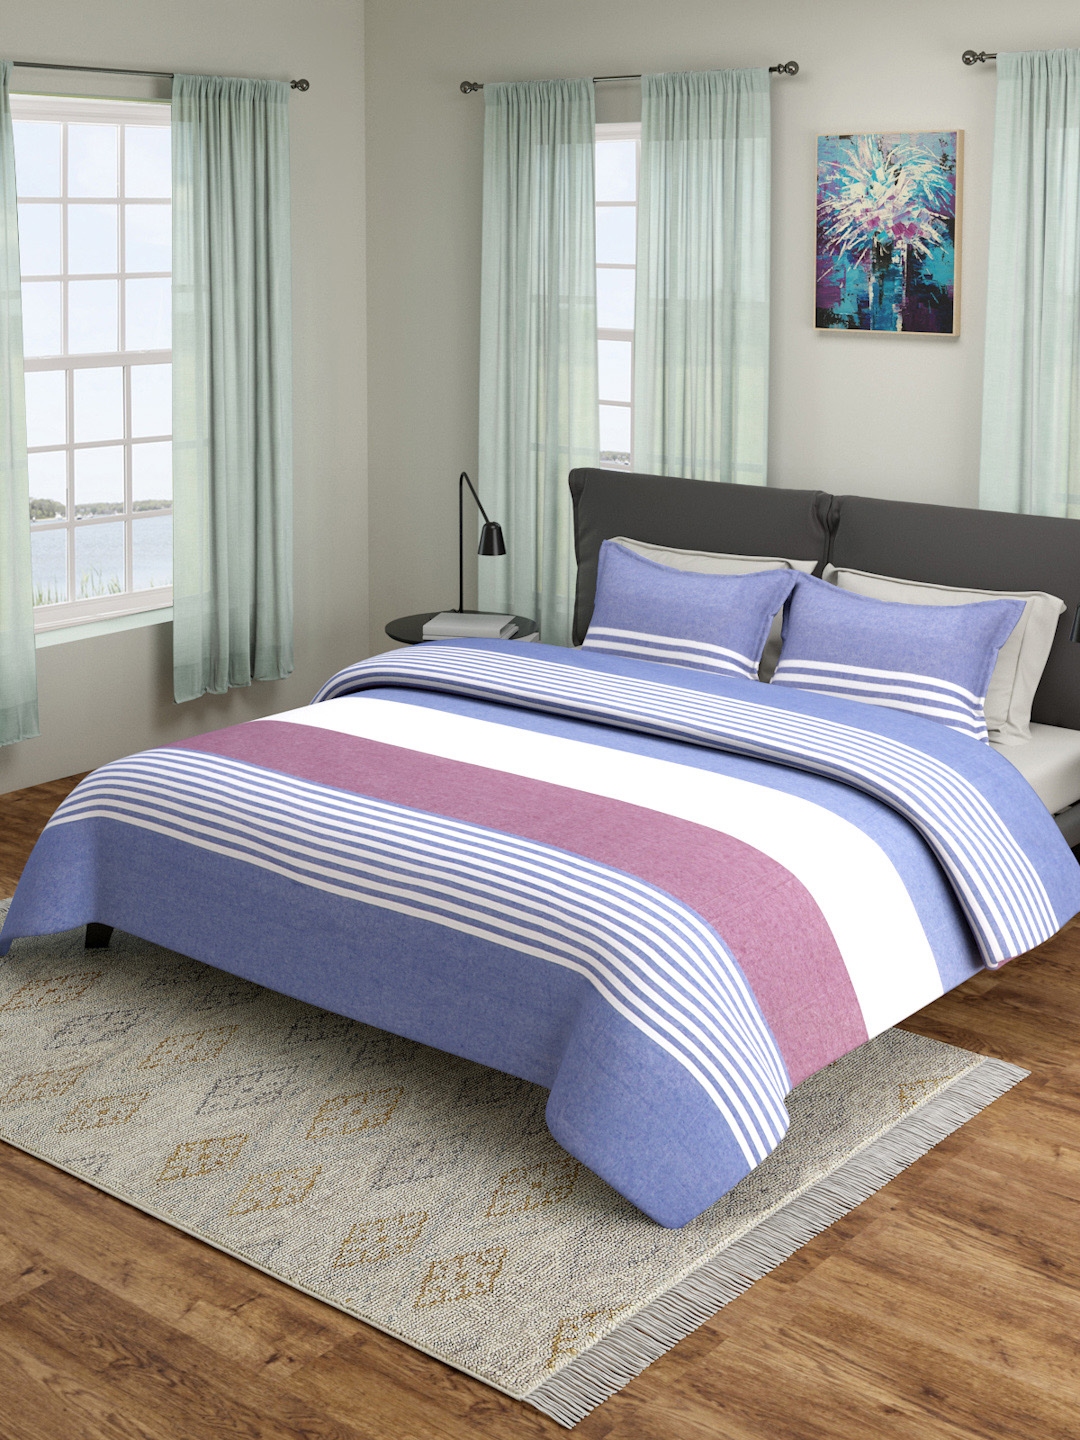 Buy ROMEE Blue & White Striped Queen Size 180 TC Bed Sheet ...